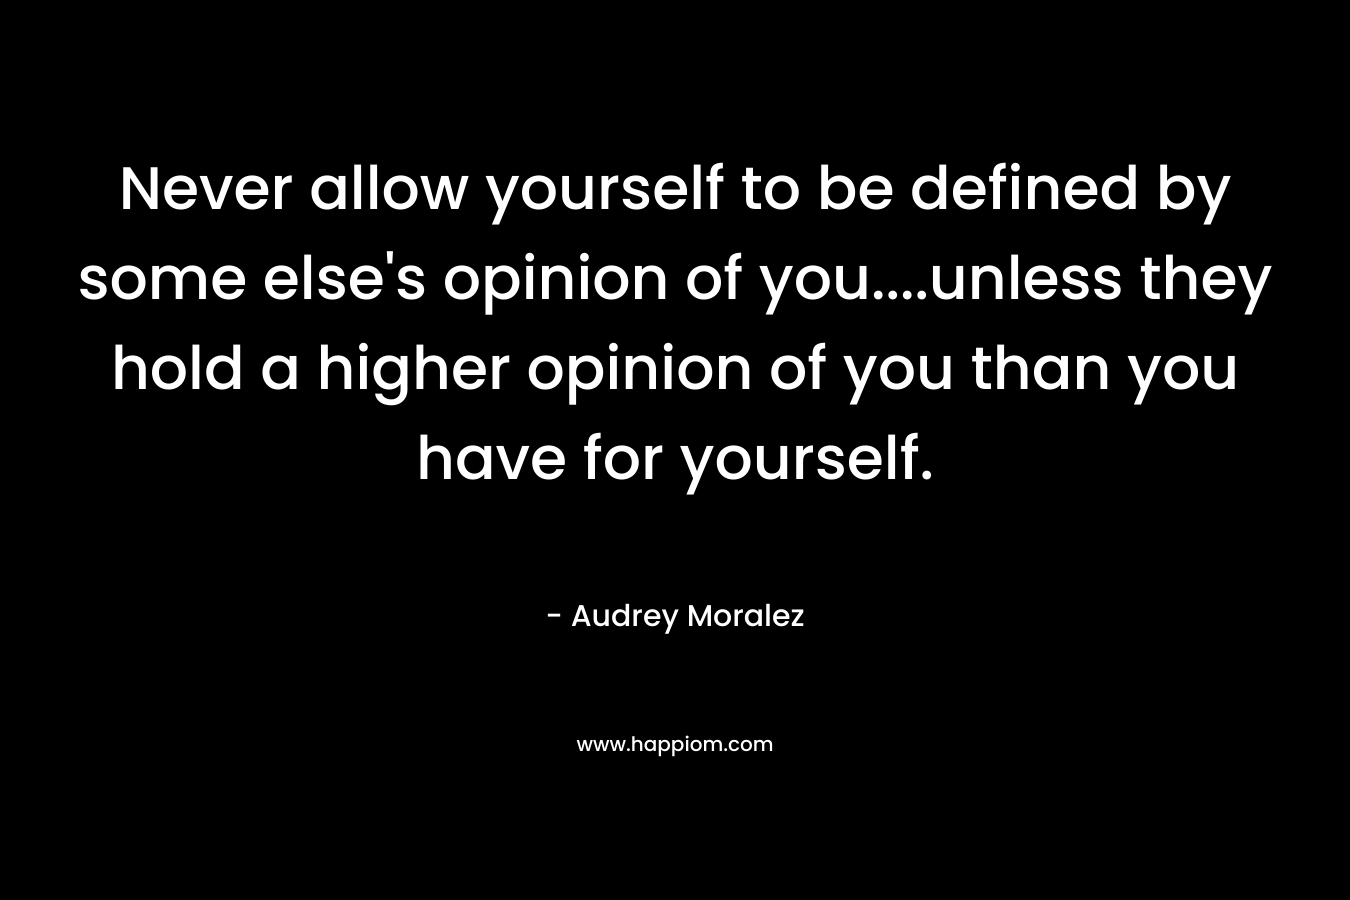 Never allow yourself to be defined by some else's opinion of you....unless they hold a higher opinion of you than you have for yourself.